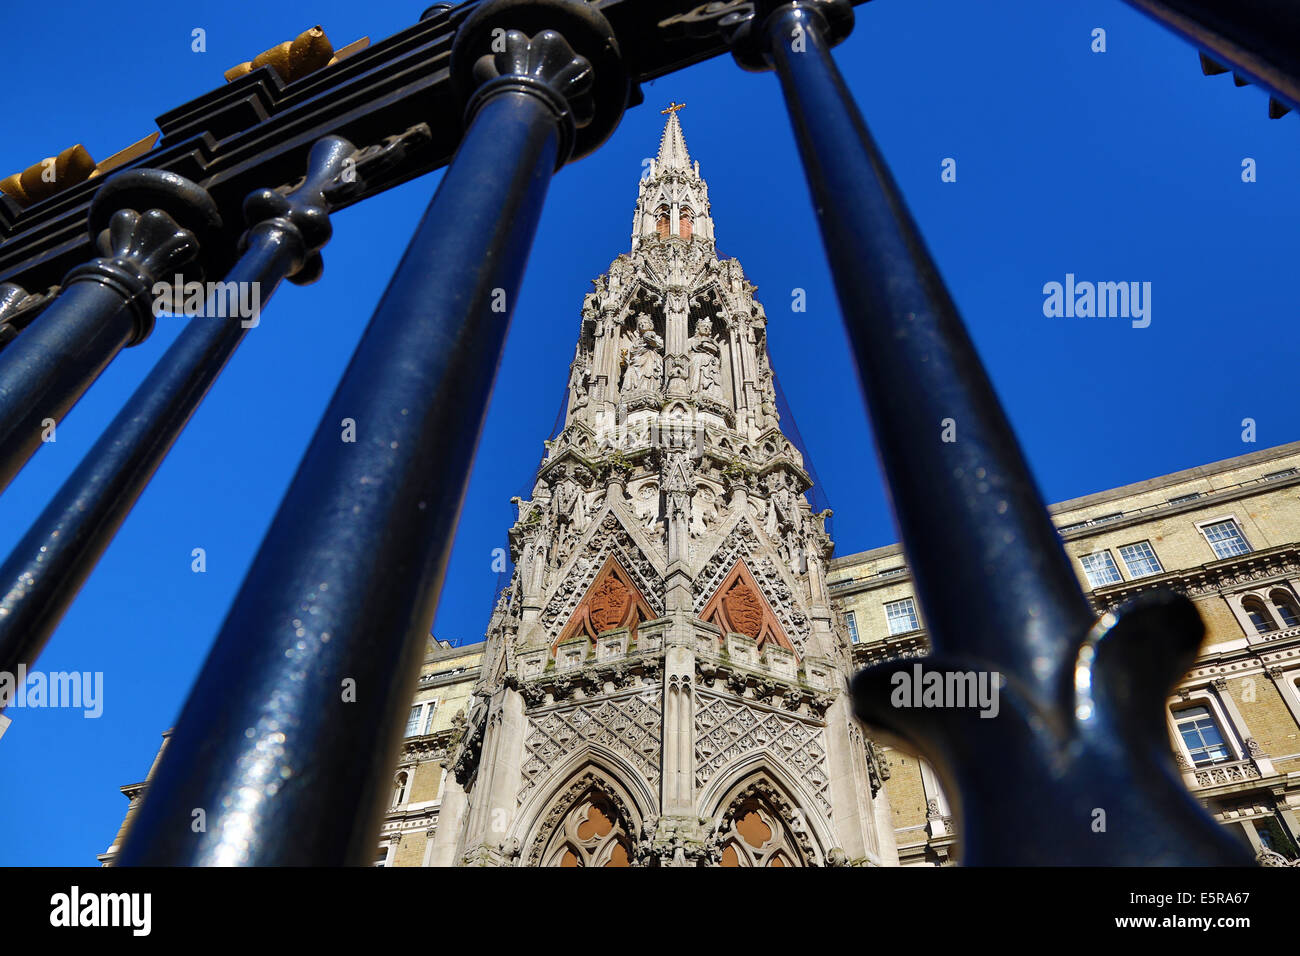 Replacement of the Eleanor Cross monument at Charing Cross Station, London, England. Stock Photo